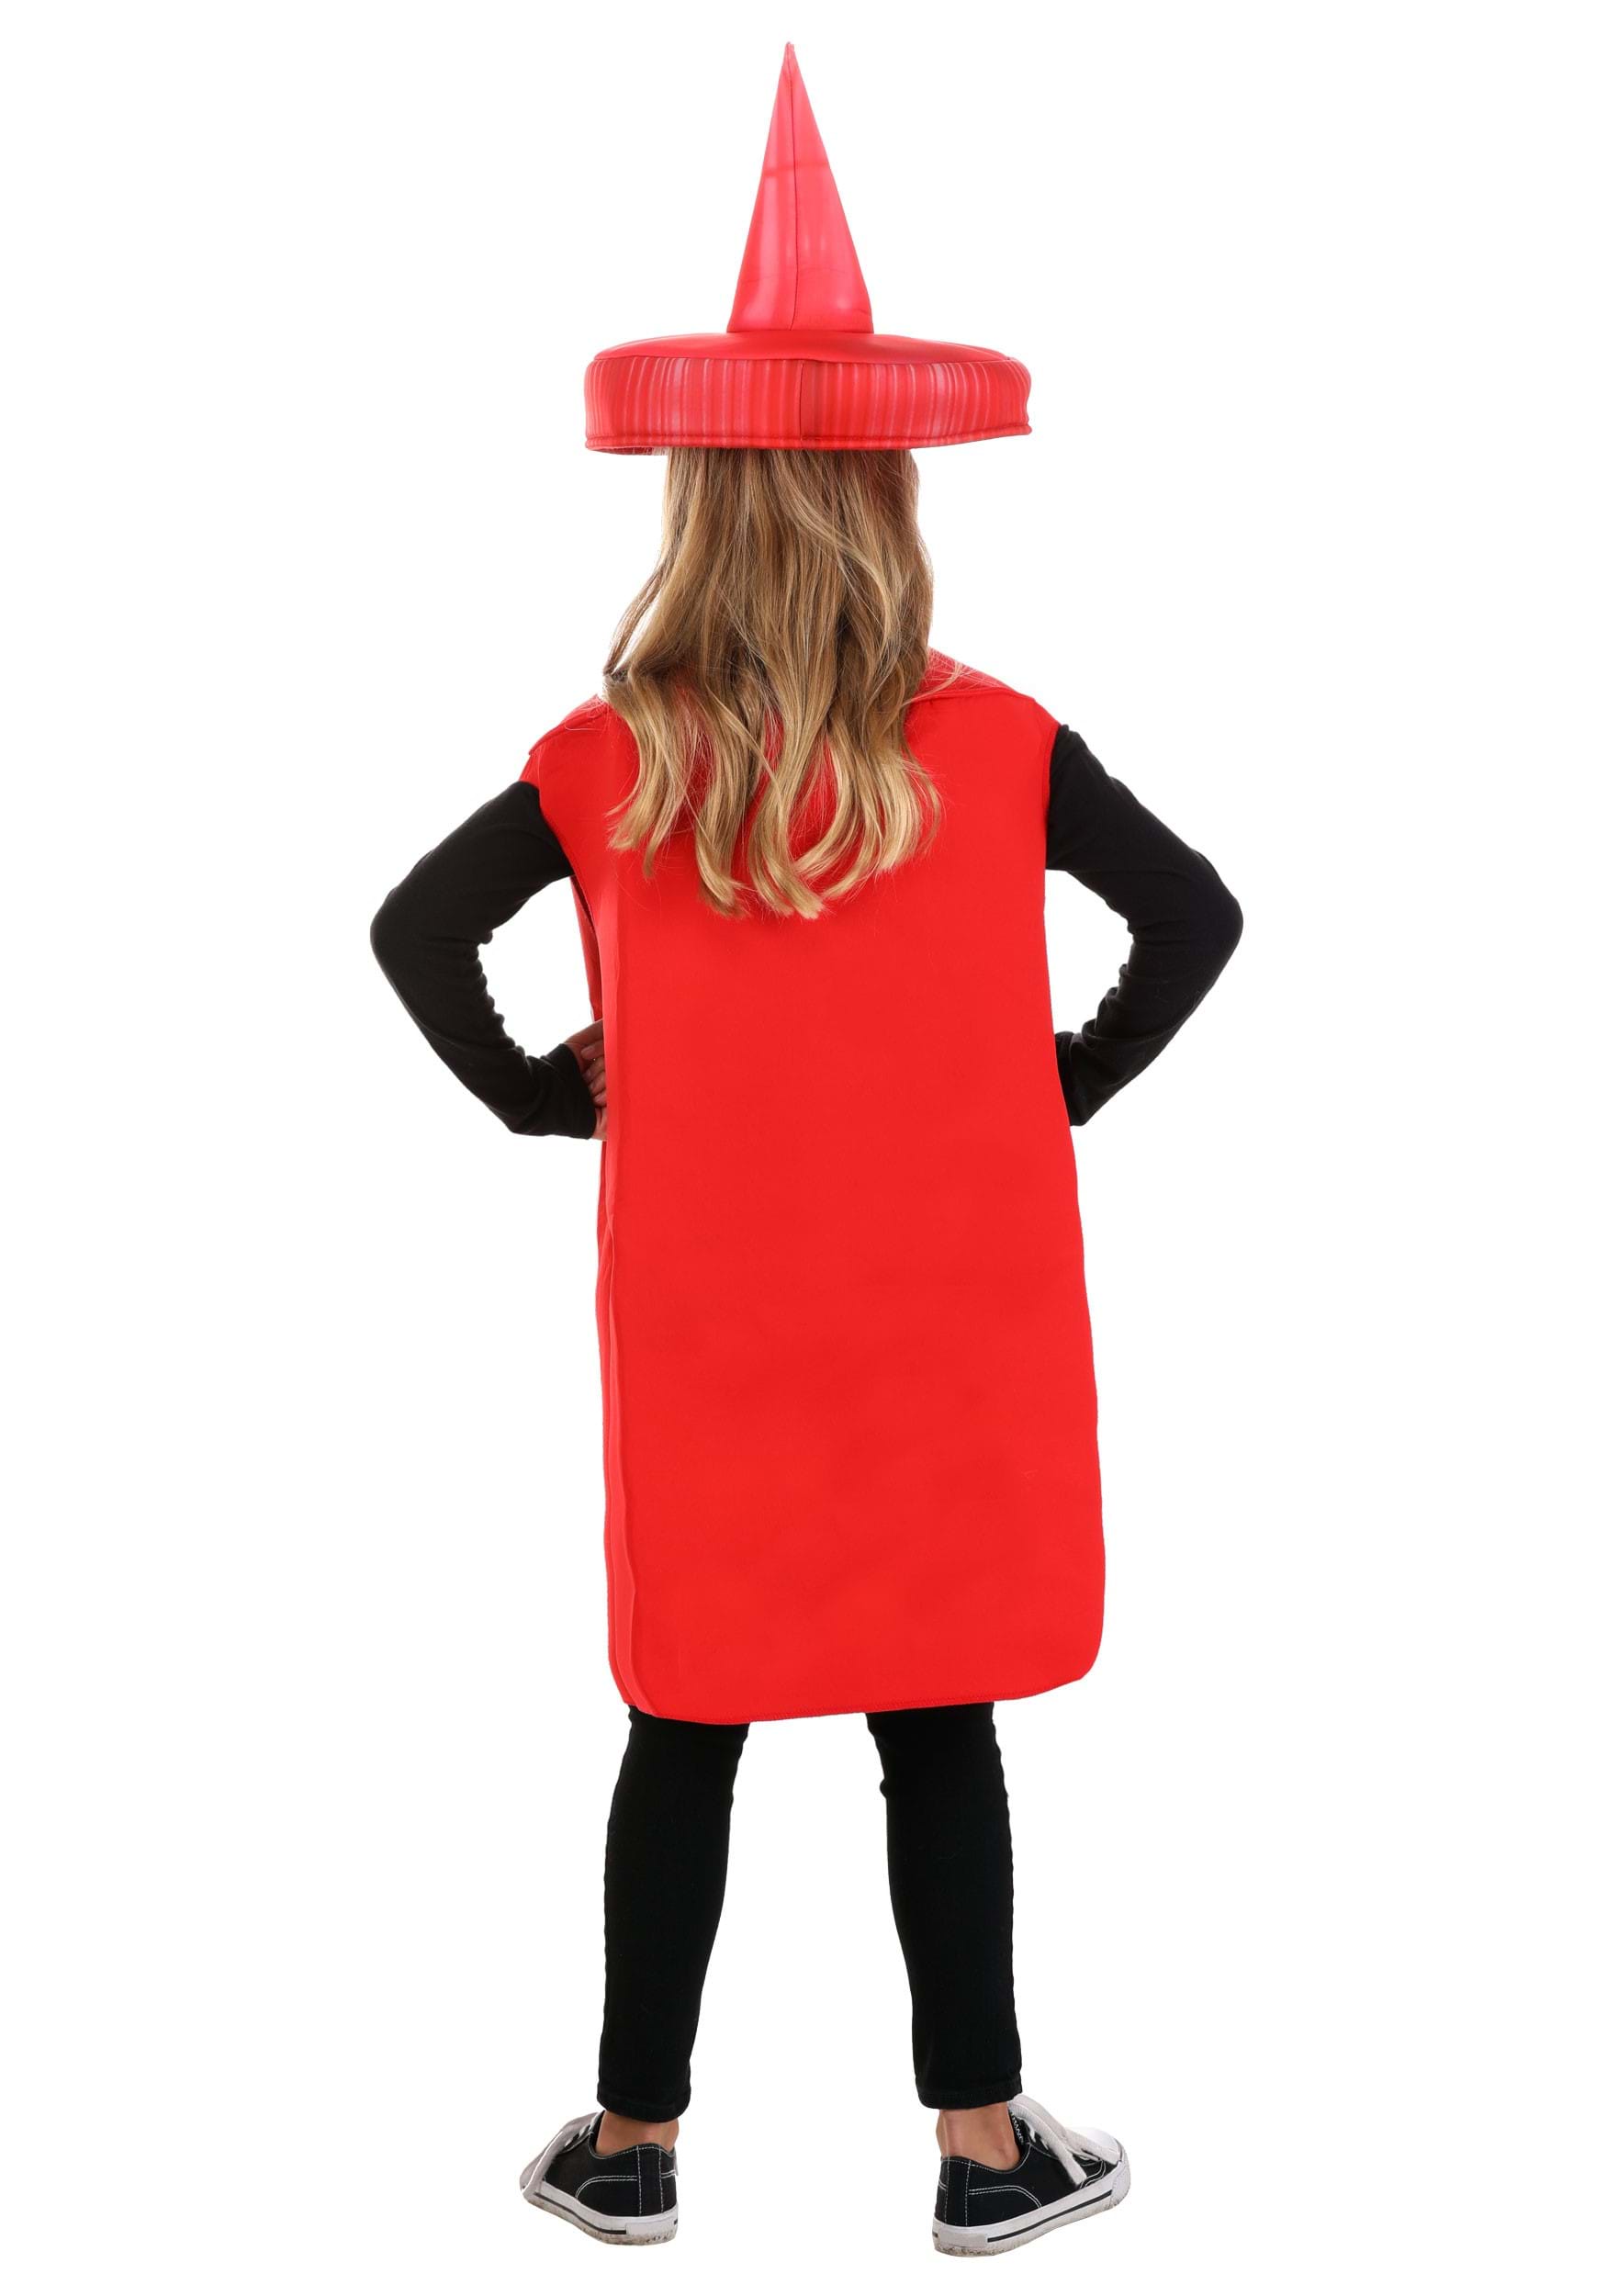 Kid's Red Ketchup Bottle Costume